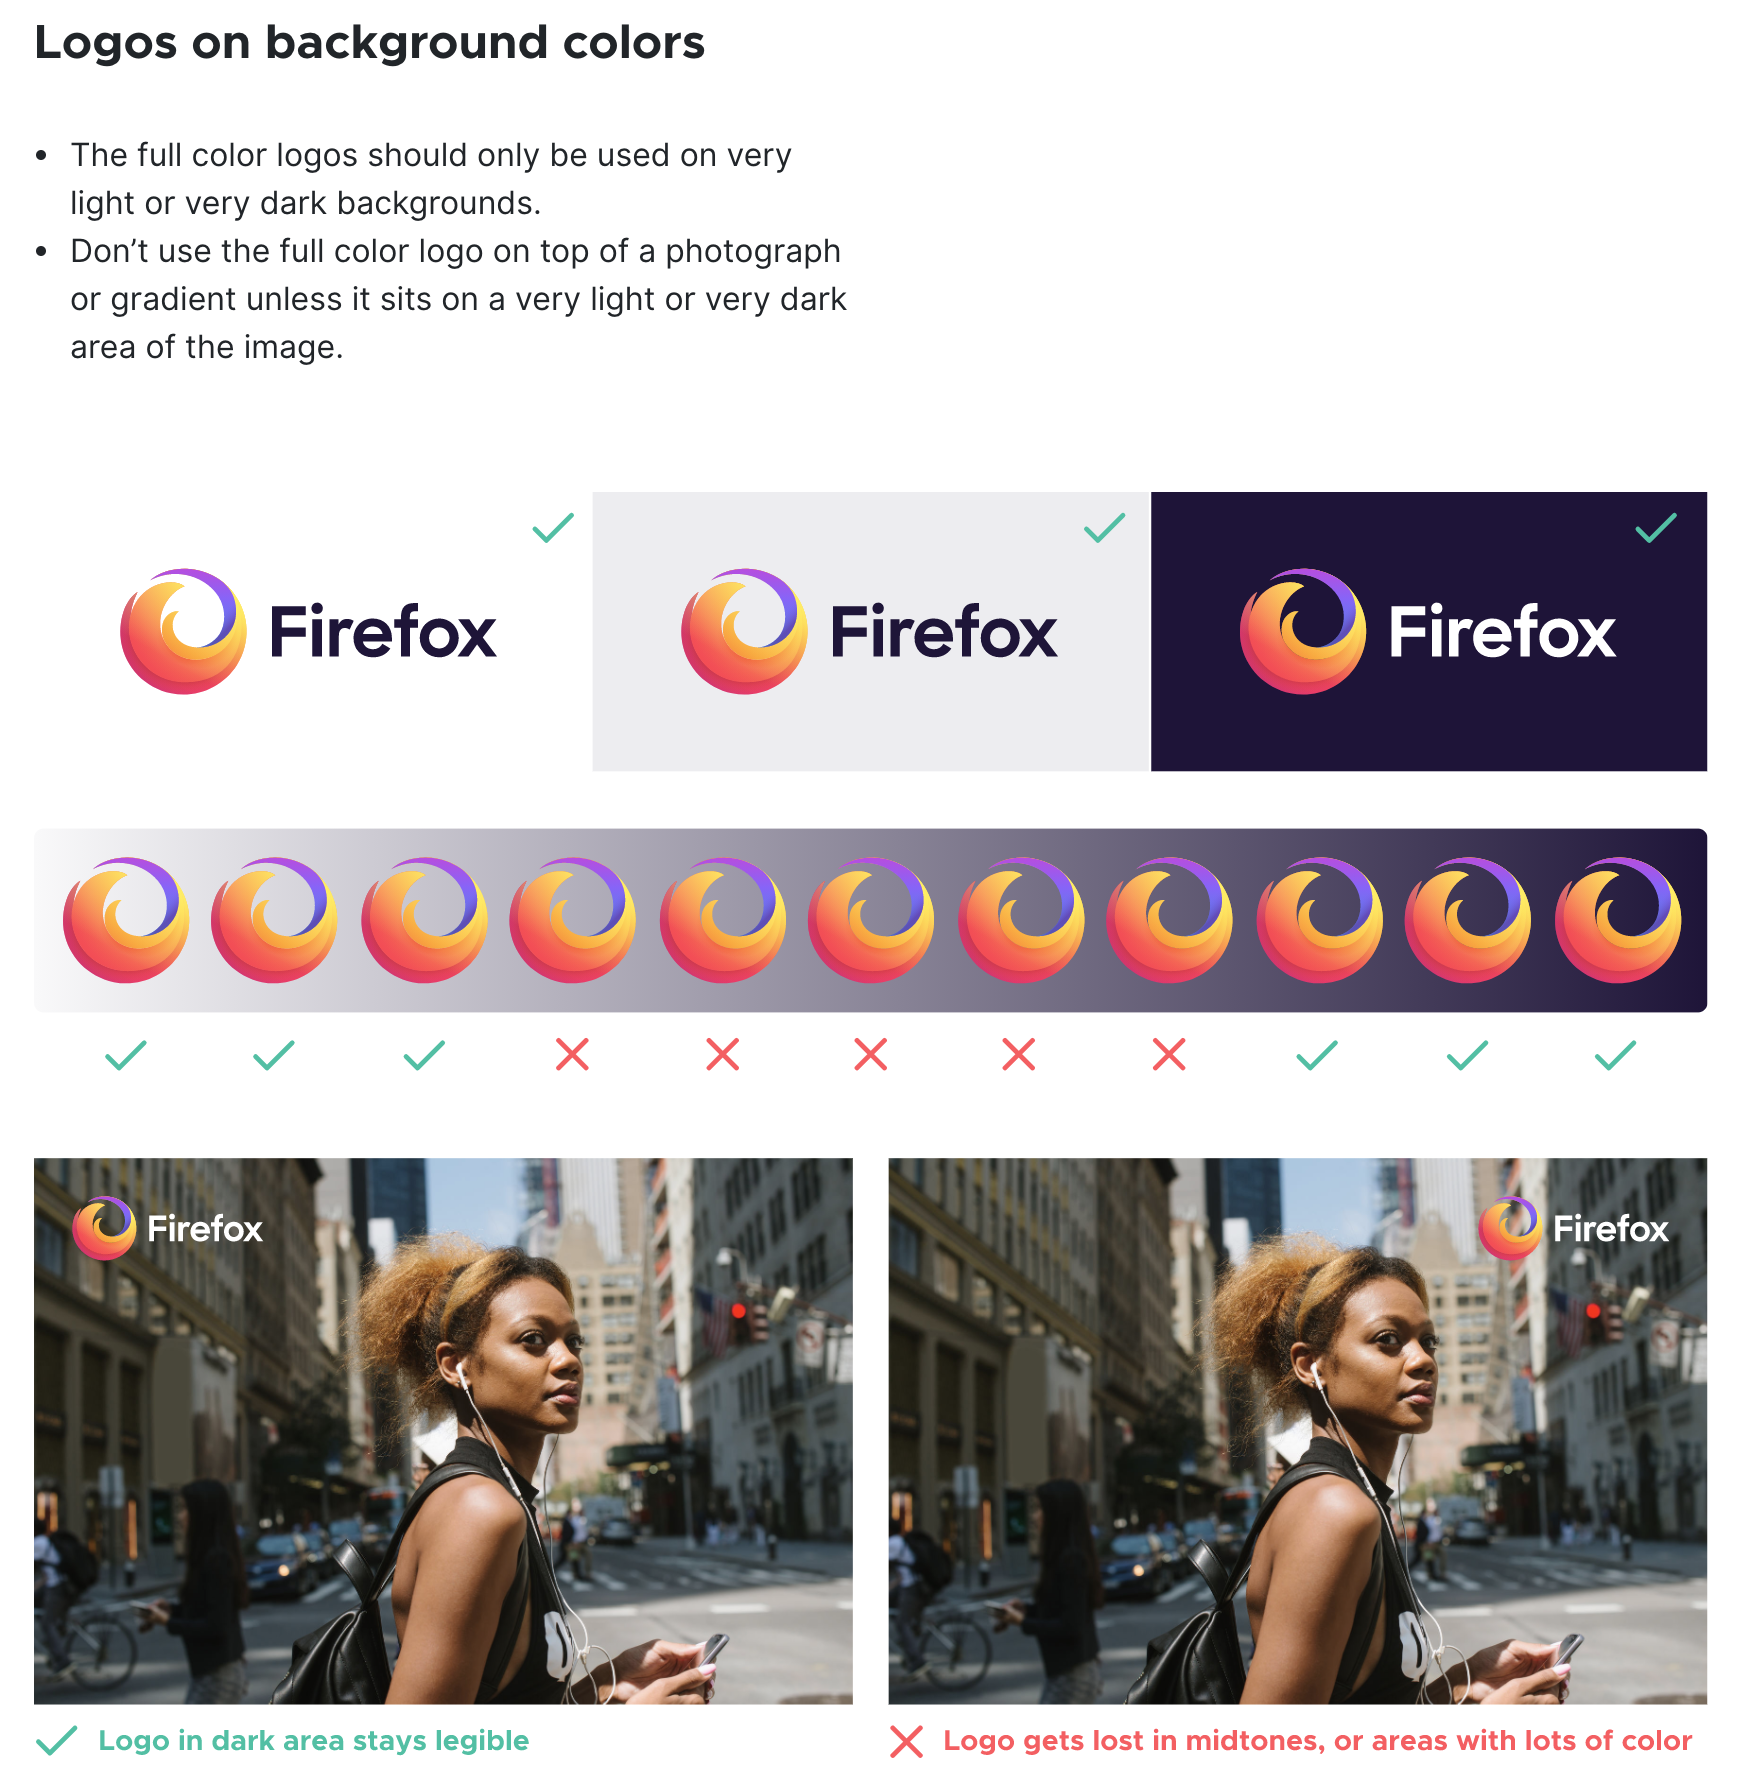 Logos and background colors rules of Mozilla Firefox style guide